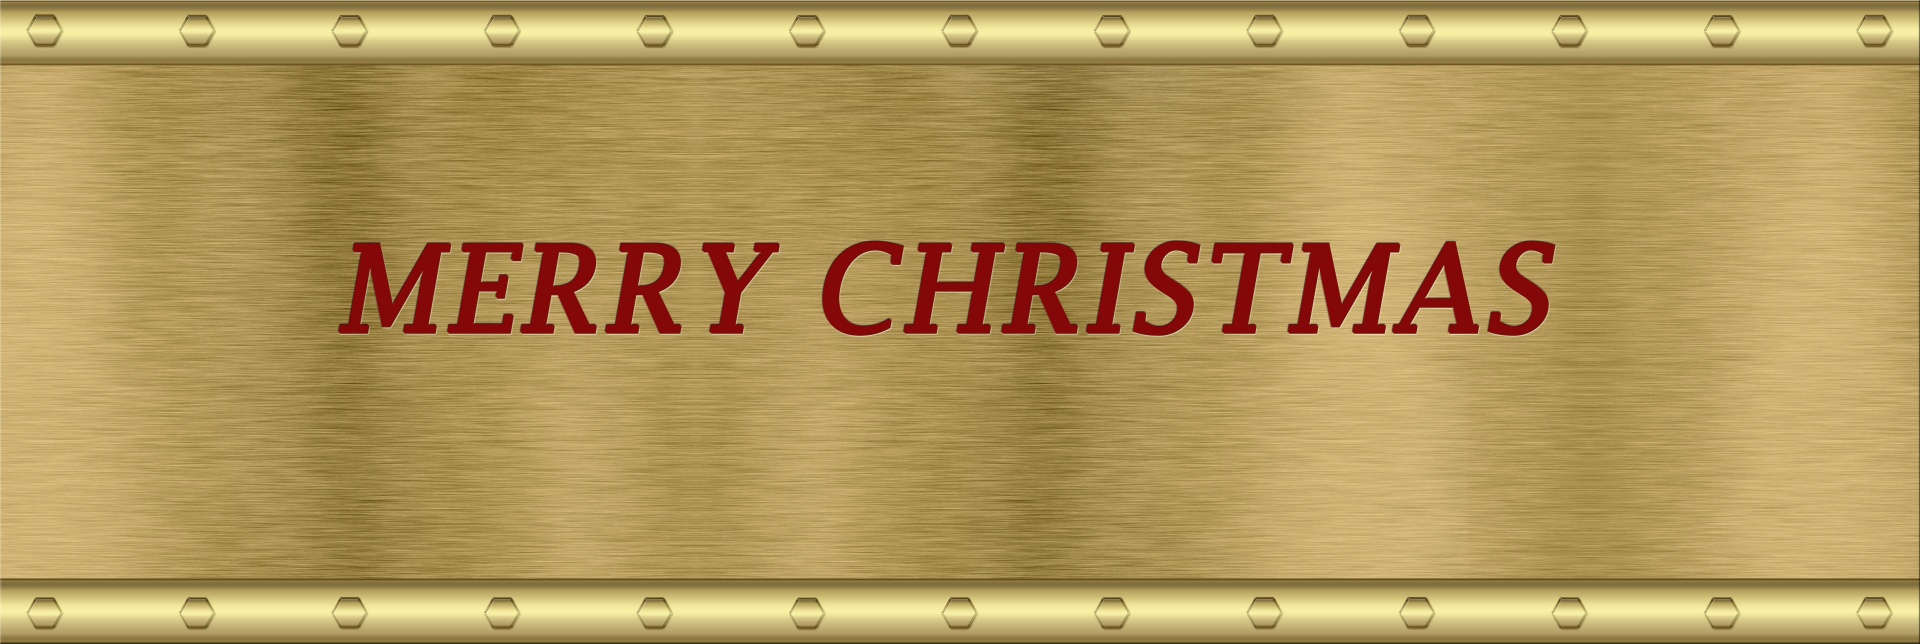 christmas banner gold free photo